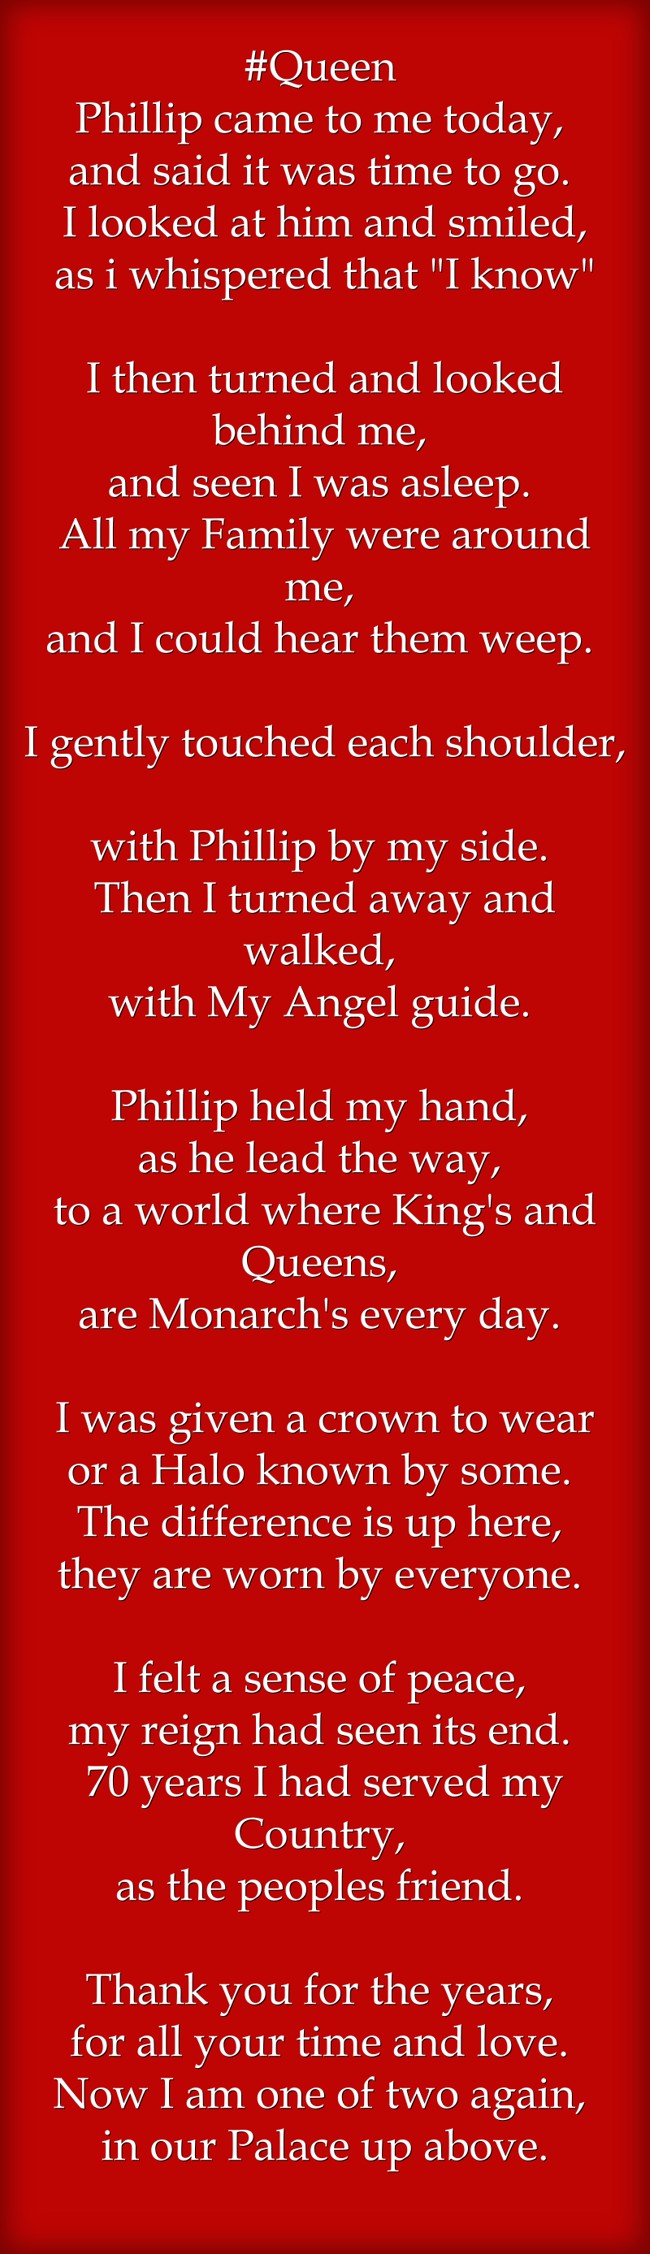 Queen Phillip came to said - Quozio me it to was time and today